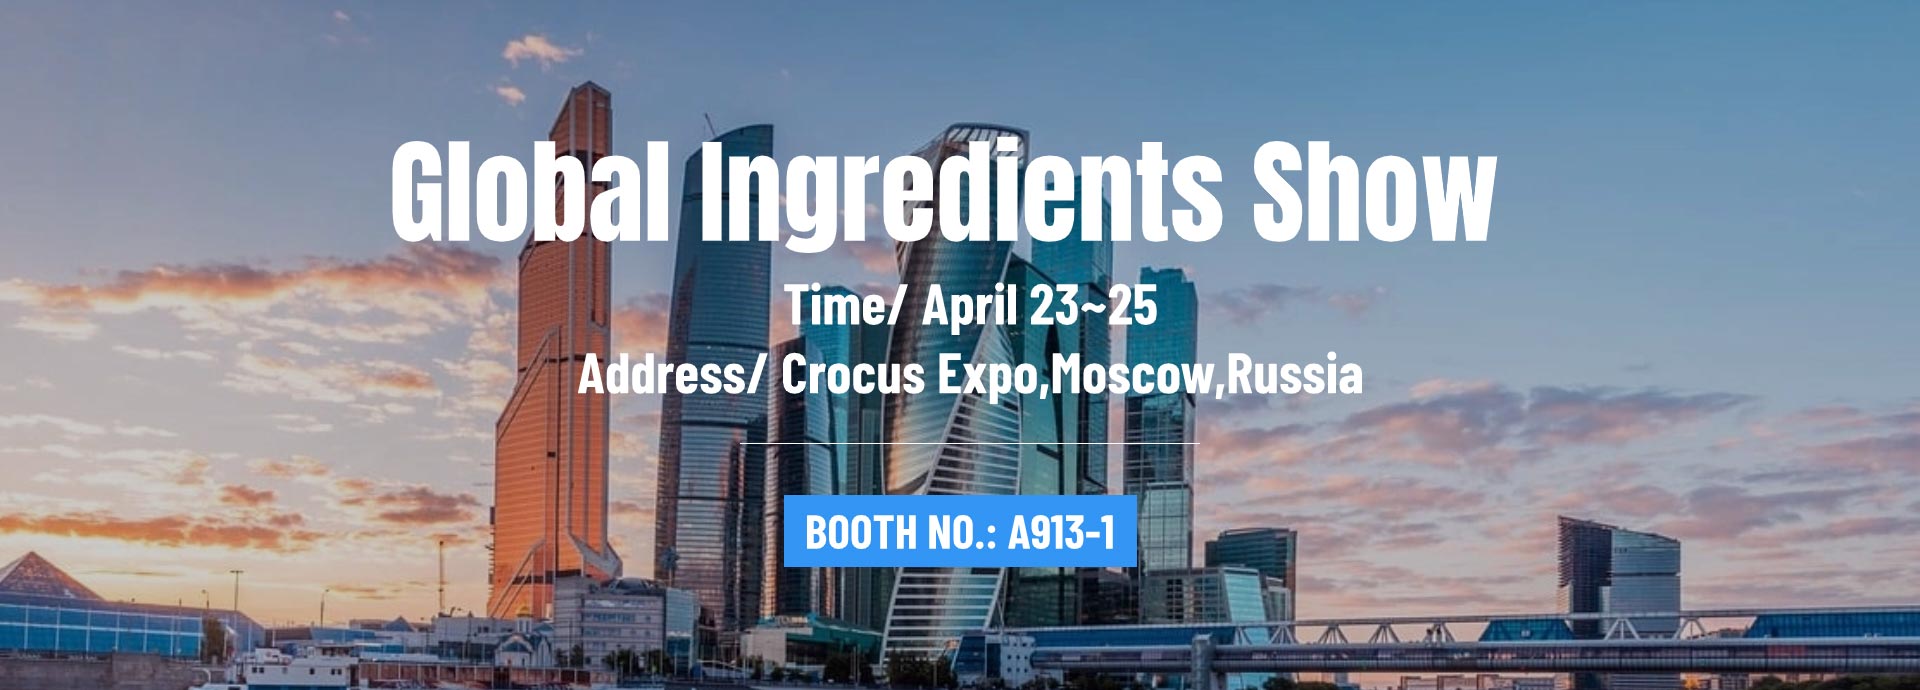 Sincerely invite you to attend the Global Ingredients Show